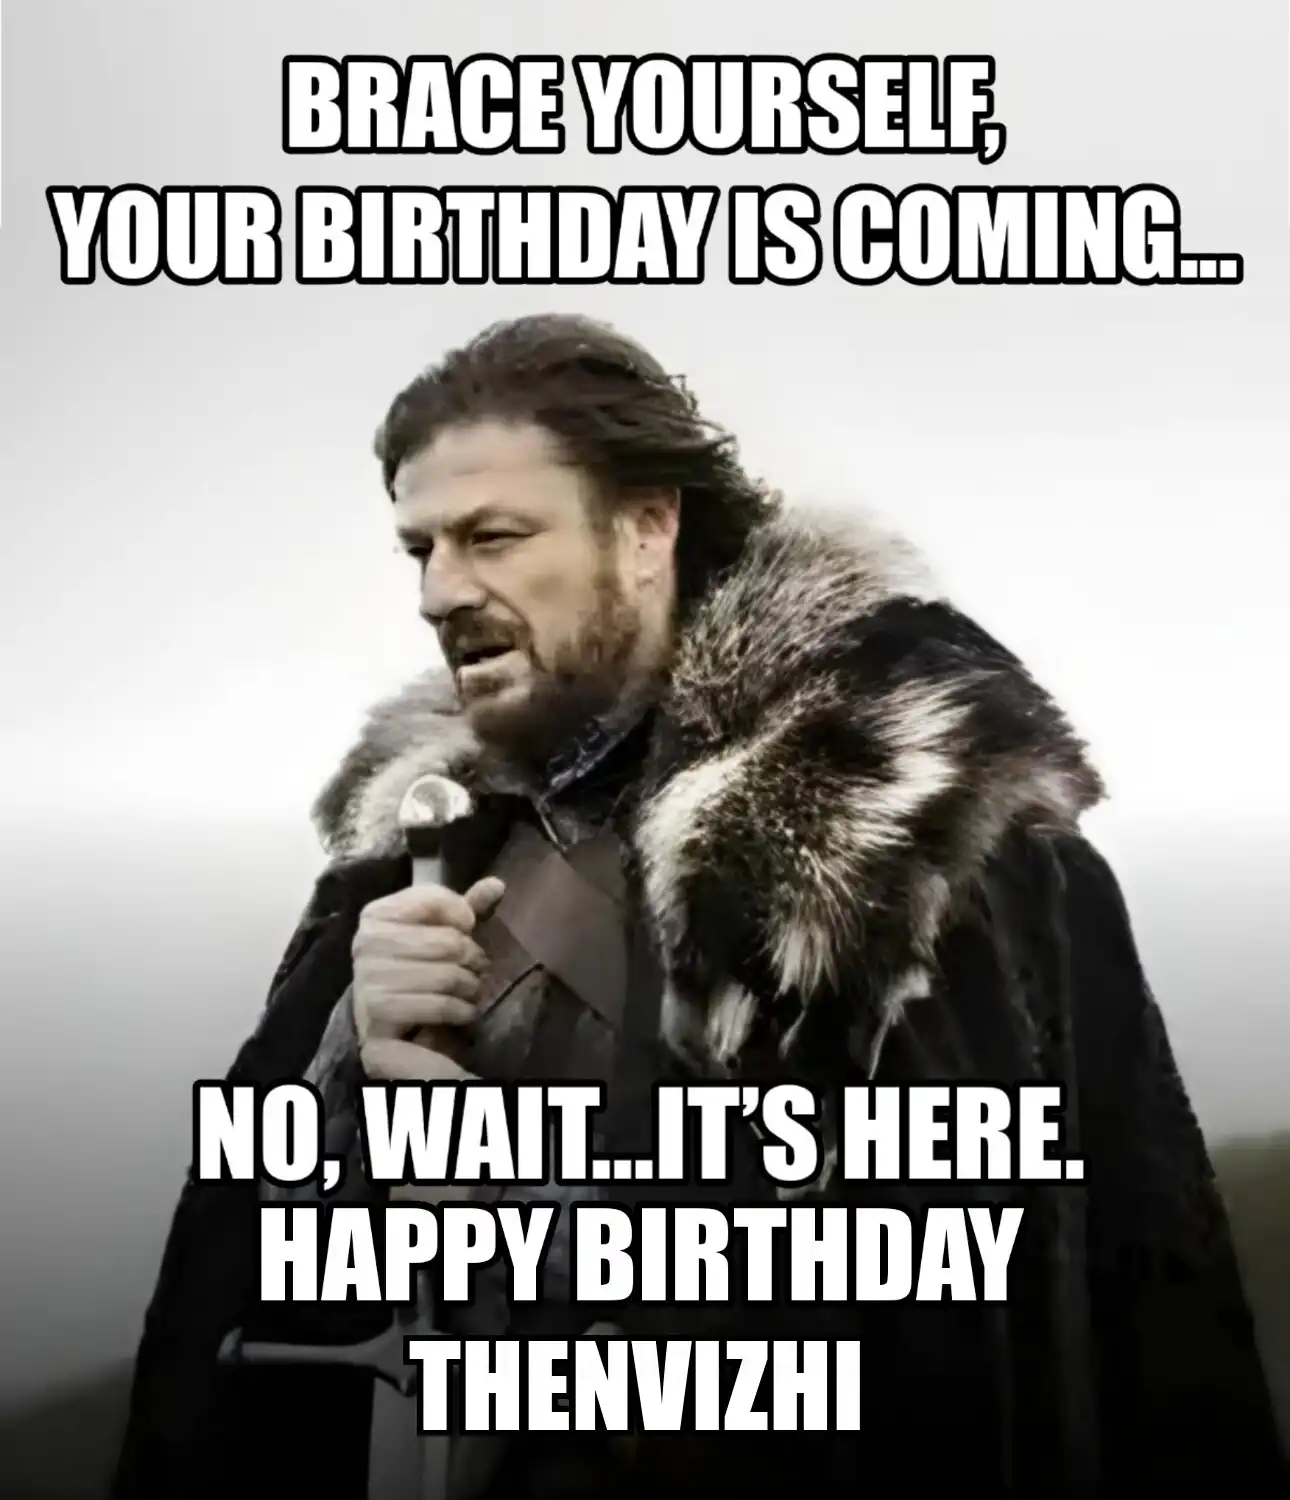 Happy Birthday Thenvizhi Brace Yourself Your Birthday Is Coming Meme